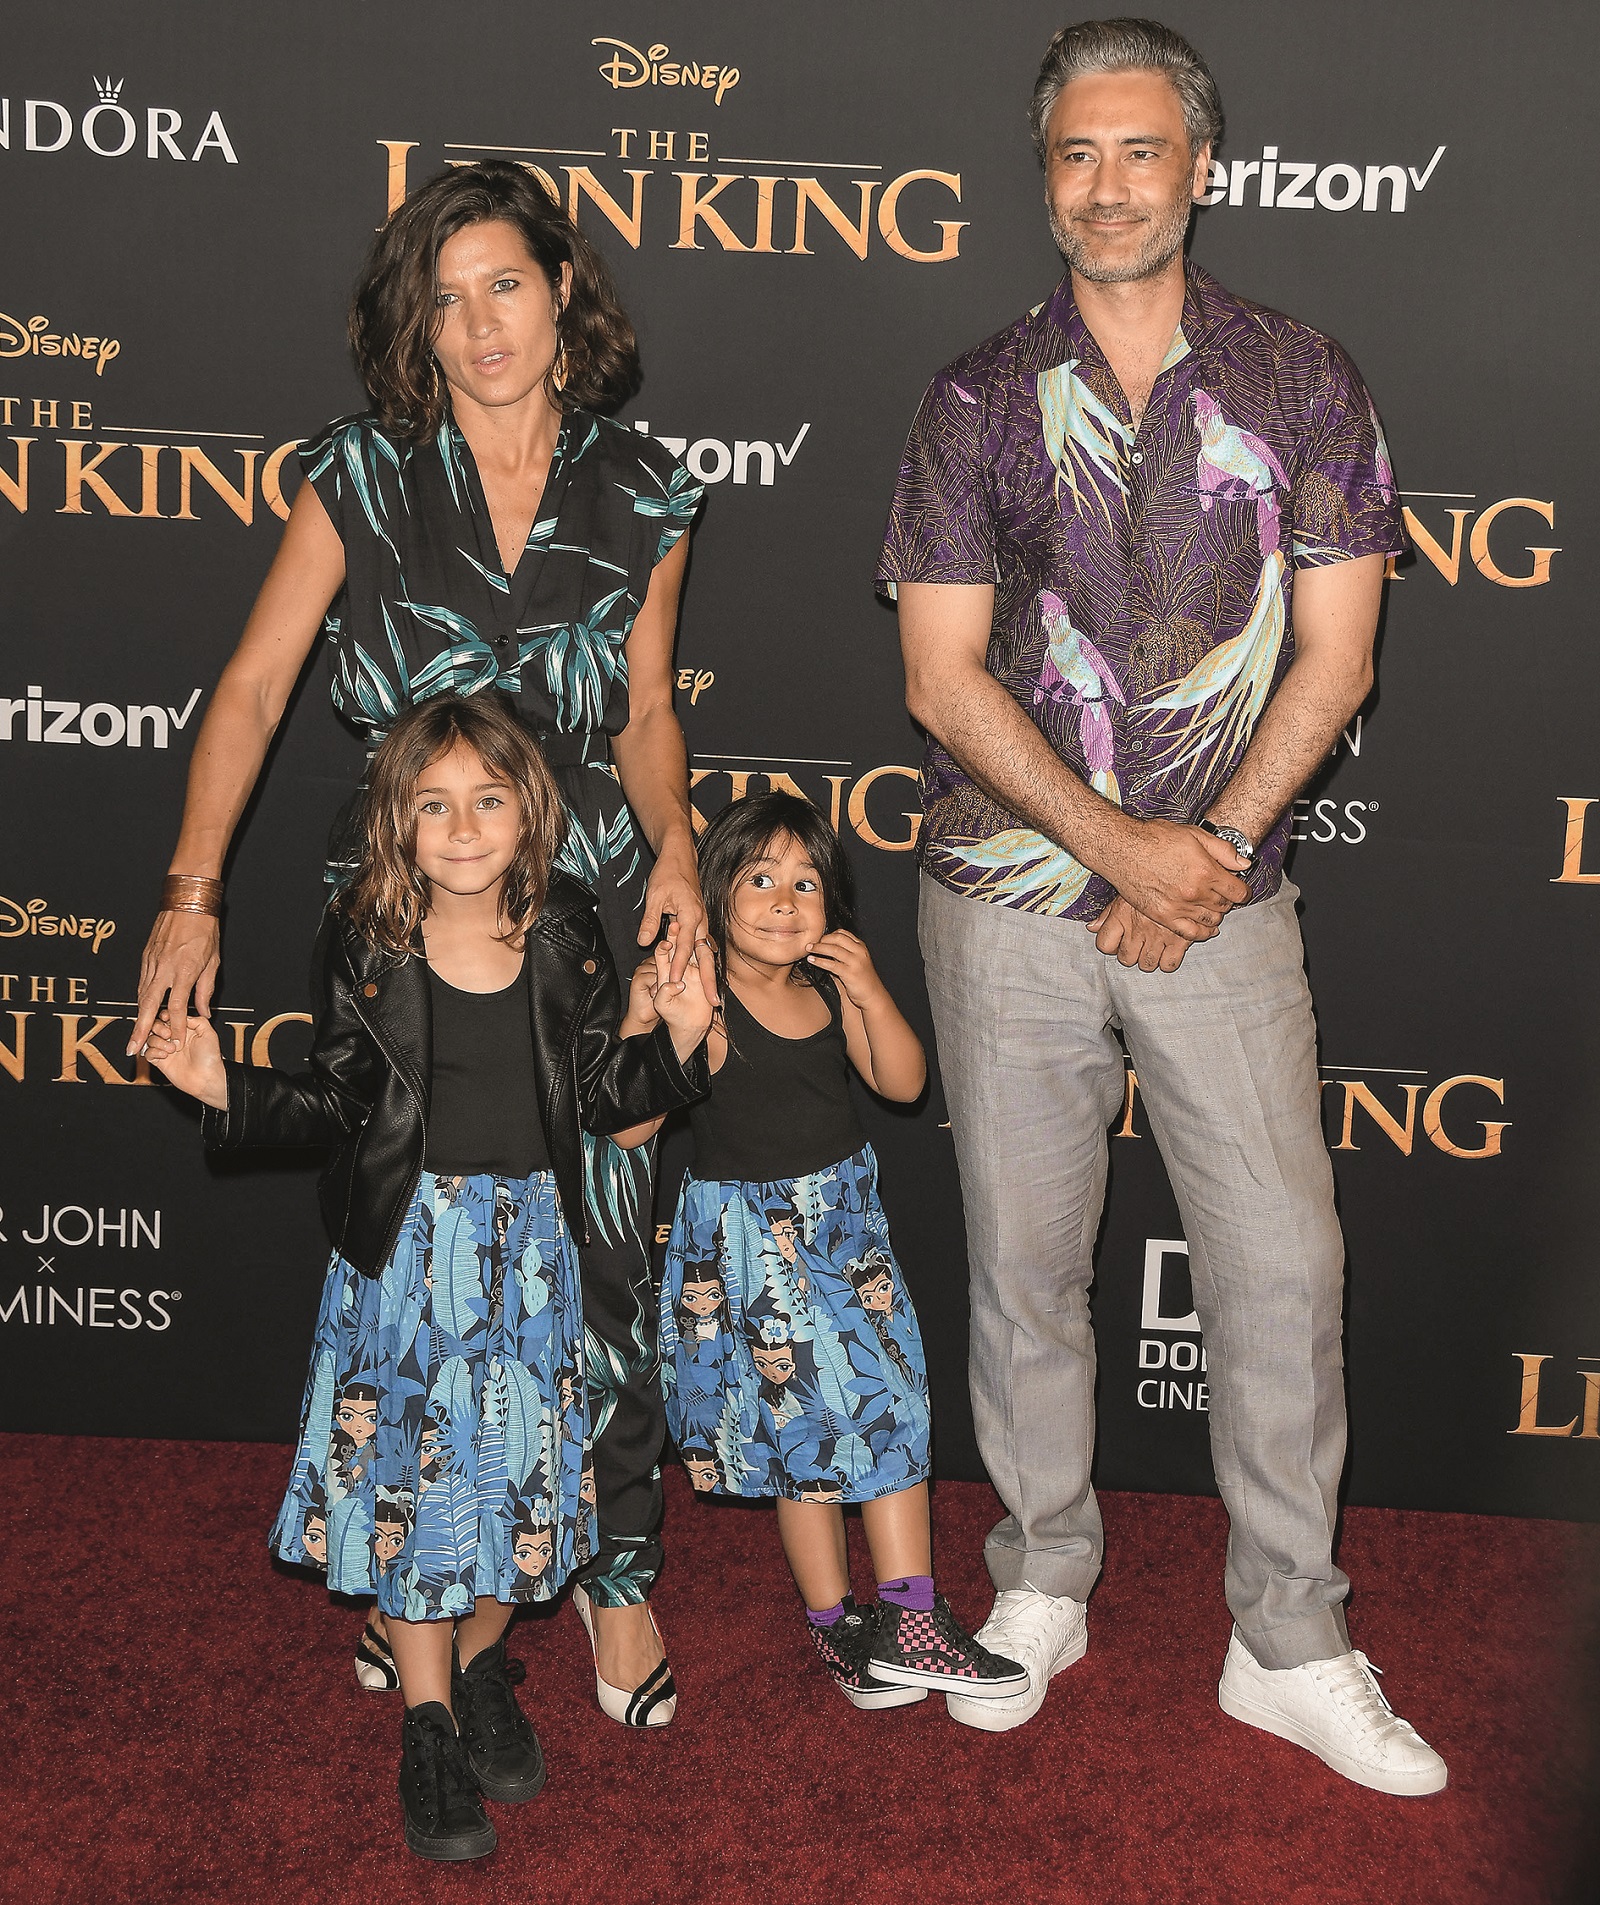 Chelsea Cohen, Taika Waititi and Kids at the Disney's THE LION KING World Premiere held at the Dolby Theatre in Hollywood, CA on Tuesday, July 9, 2019.,Image: 456660534, License: Rights-managed, Restrictions: *** World Rights ***, Model Release: no, Credit line: Sipa USA / ddp USA / Profimedia